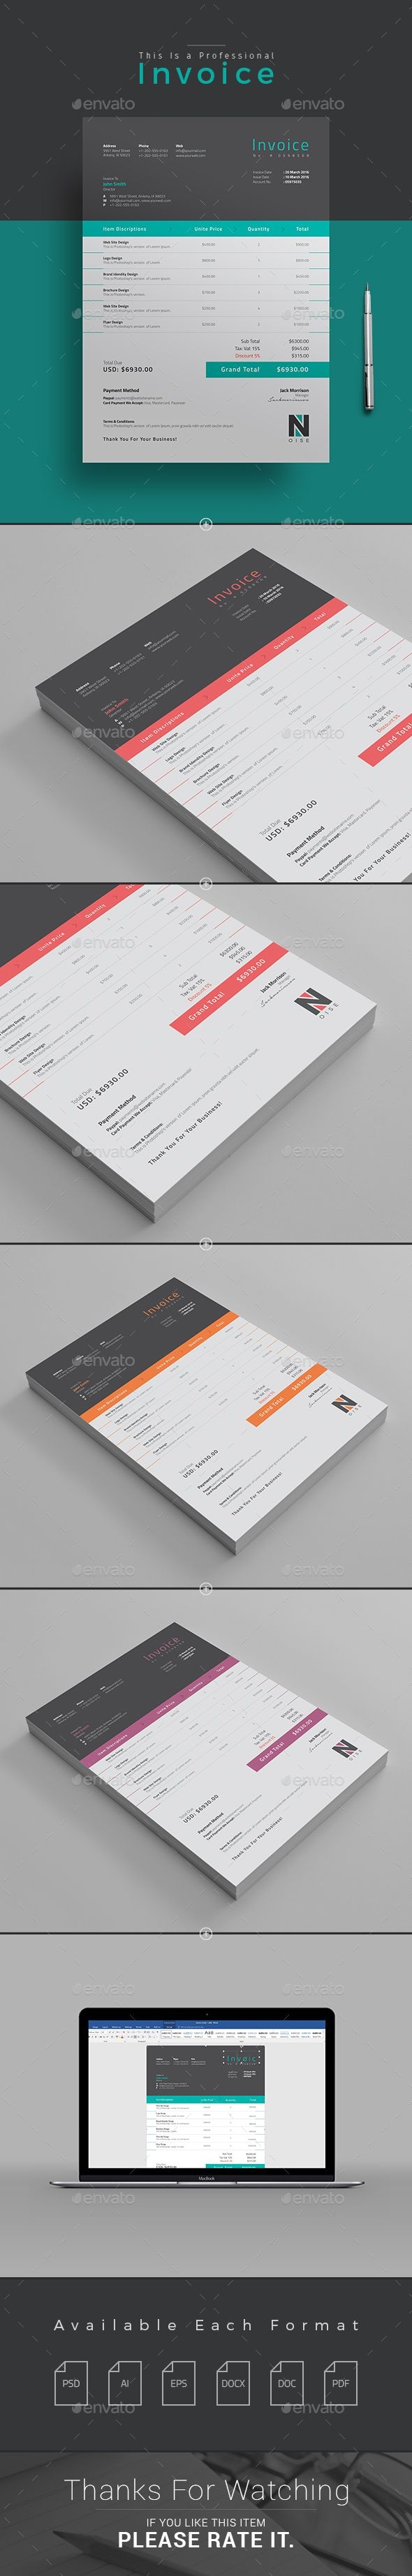 1000 ideas about invoice template on pinterest project proposal invoice template ai